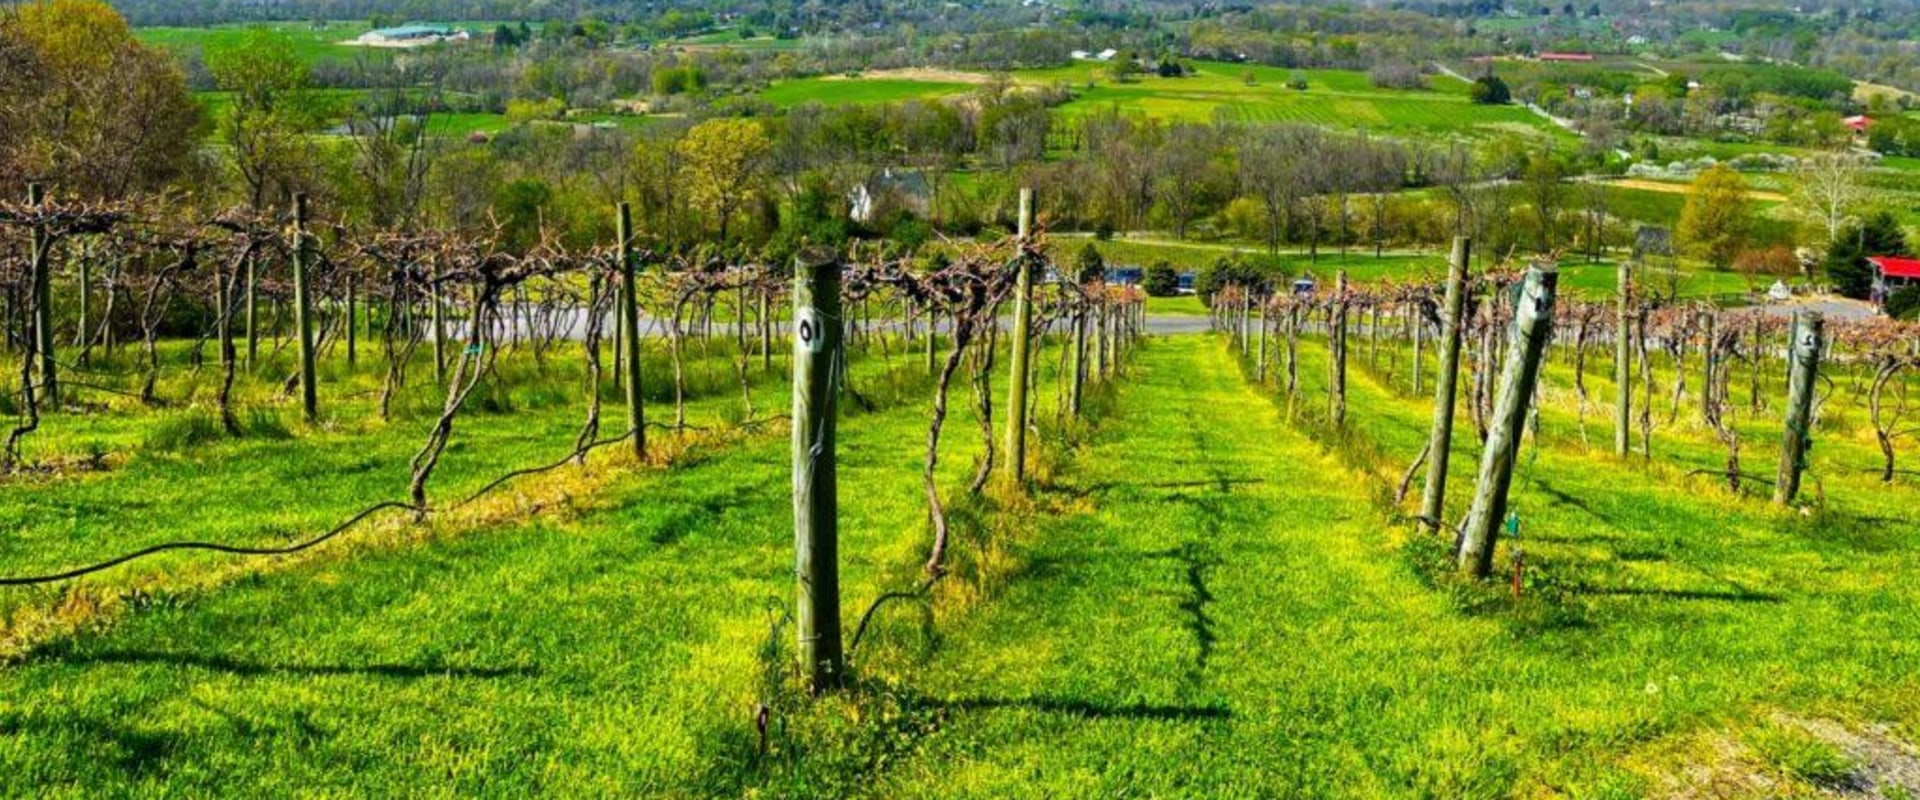 Exploring the Magnificent Vineyards of Dulles, Virginia